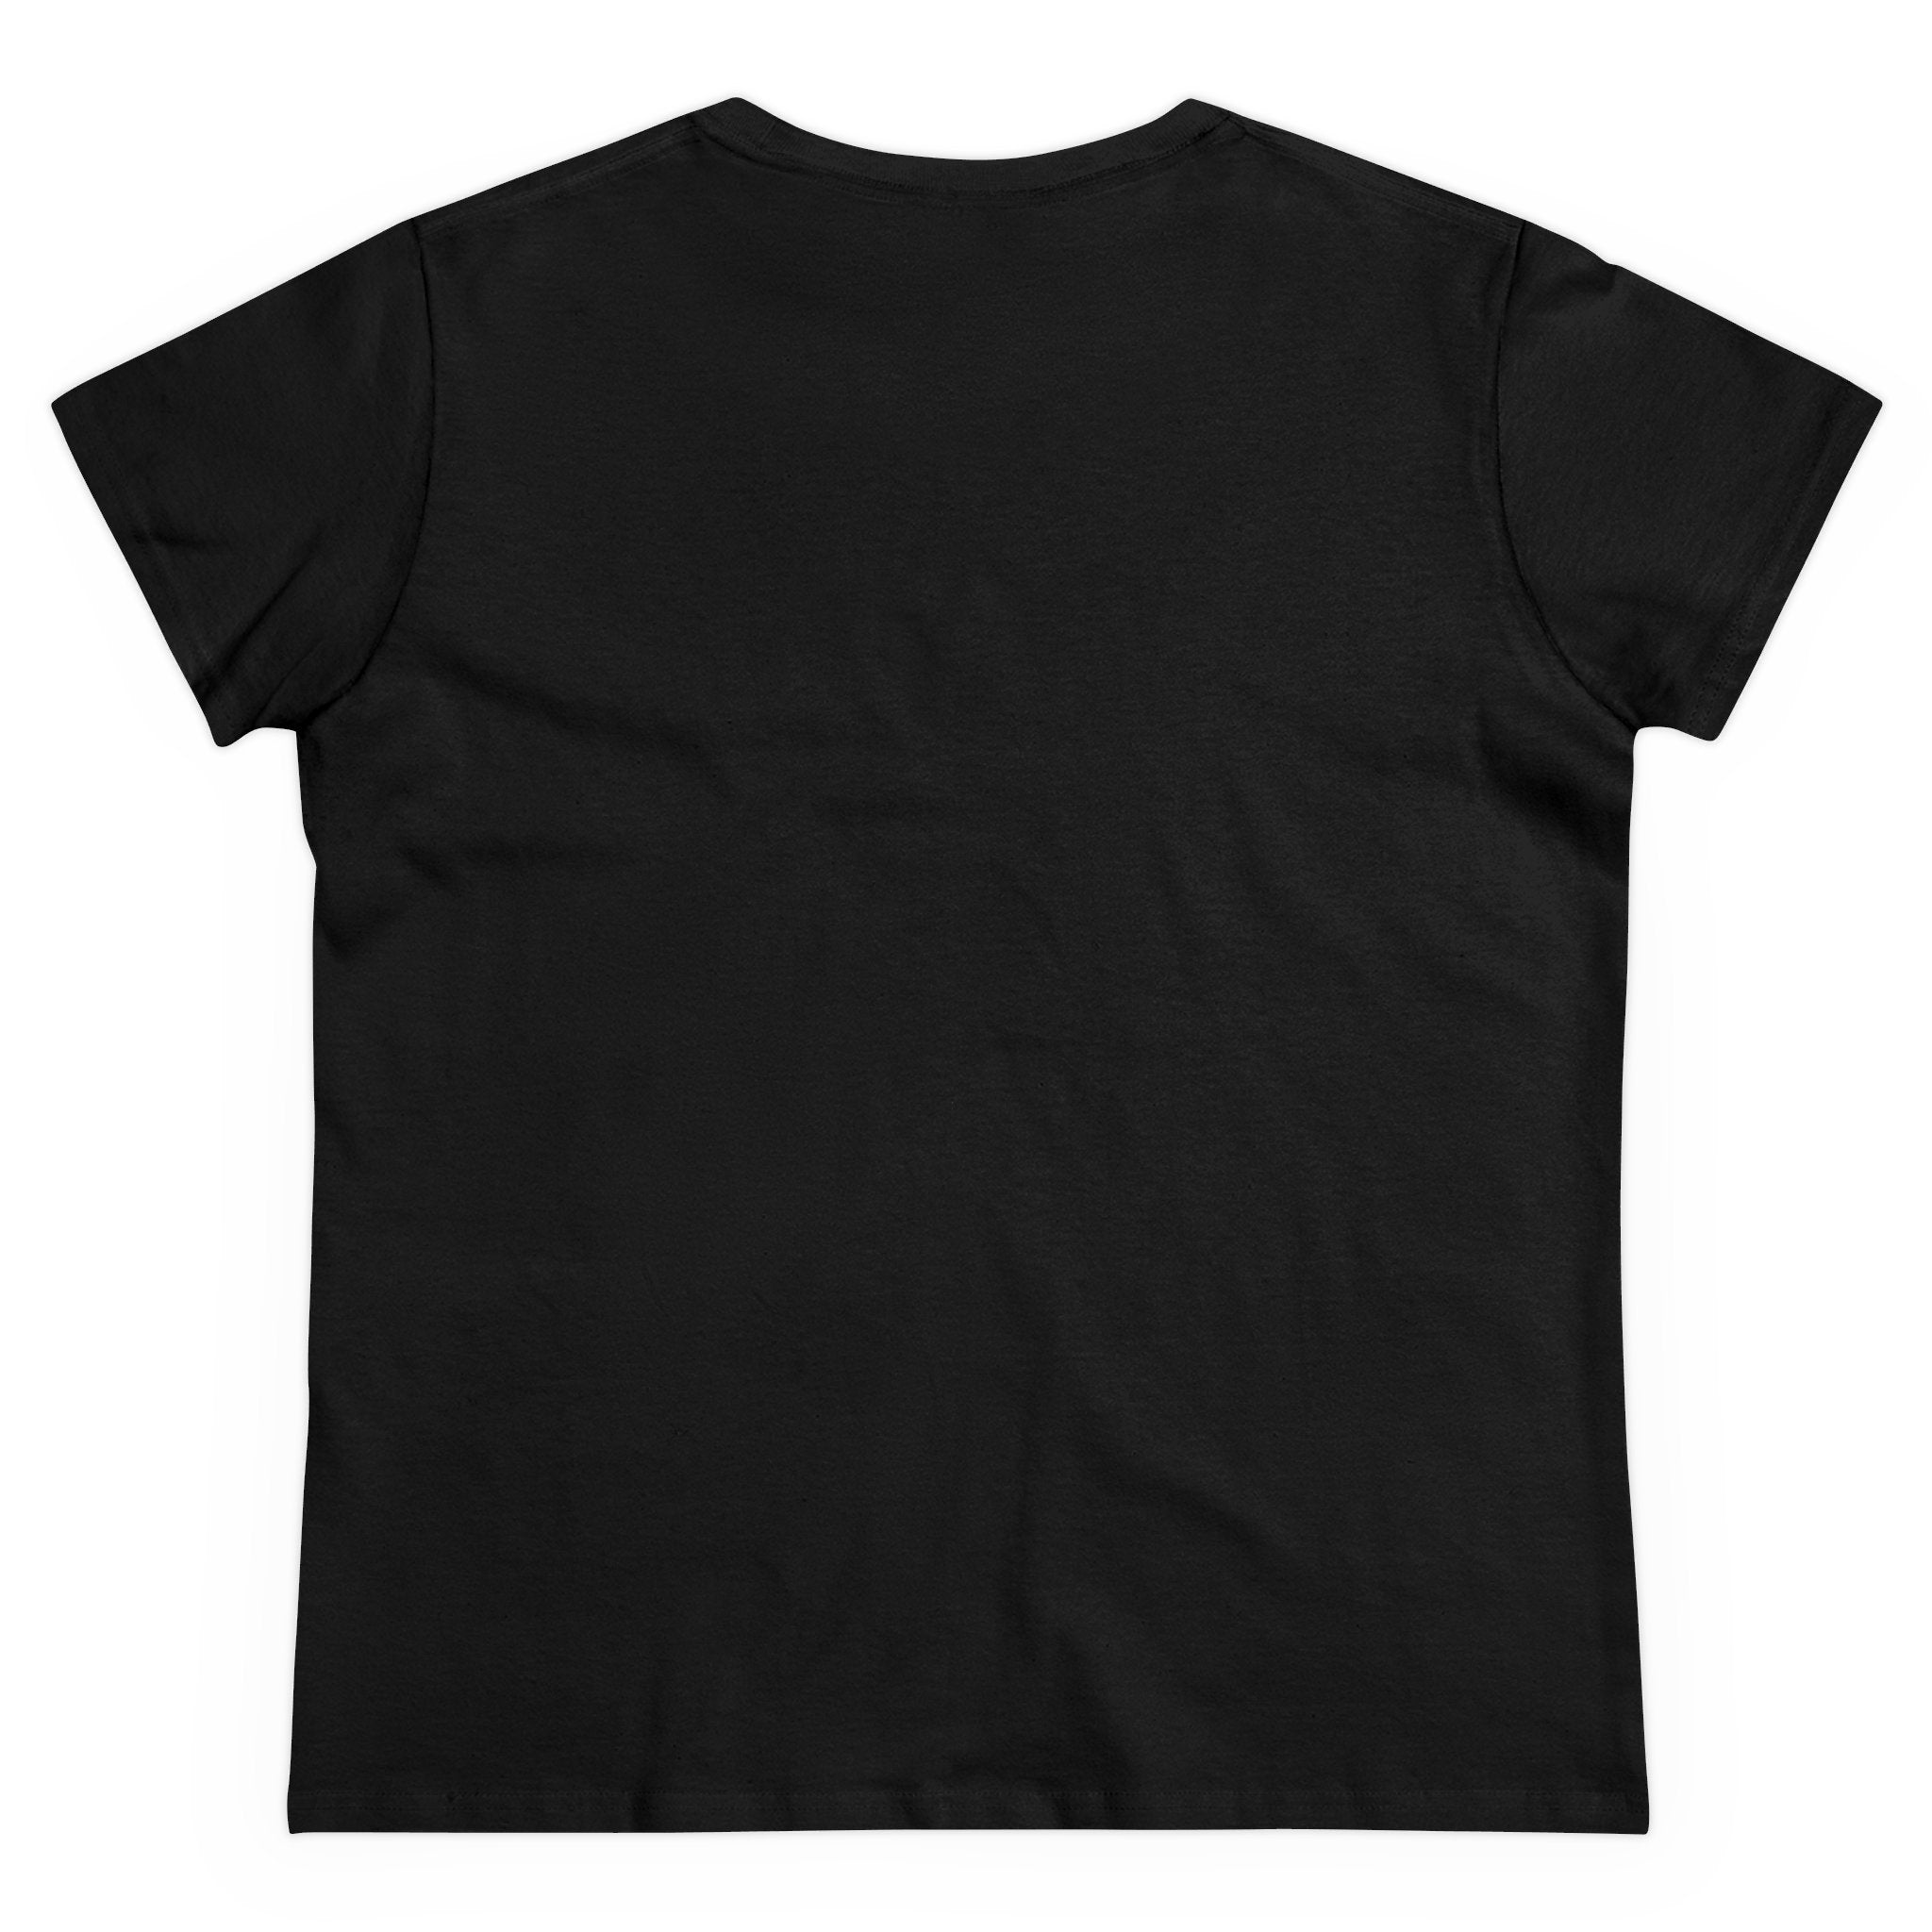 A plain black short-sleeved RG-B - Women's Tee, made from soft cotton, is shown laid out flat, displaying the back side.